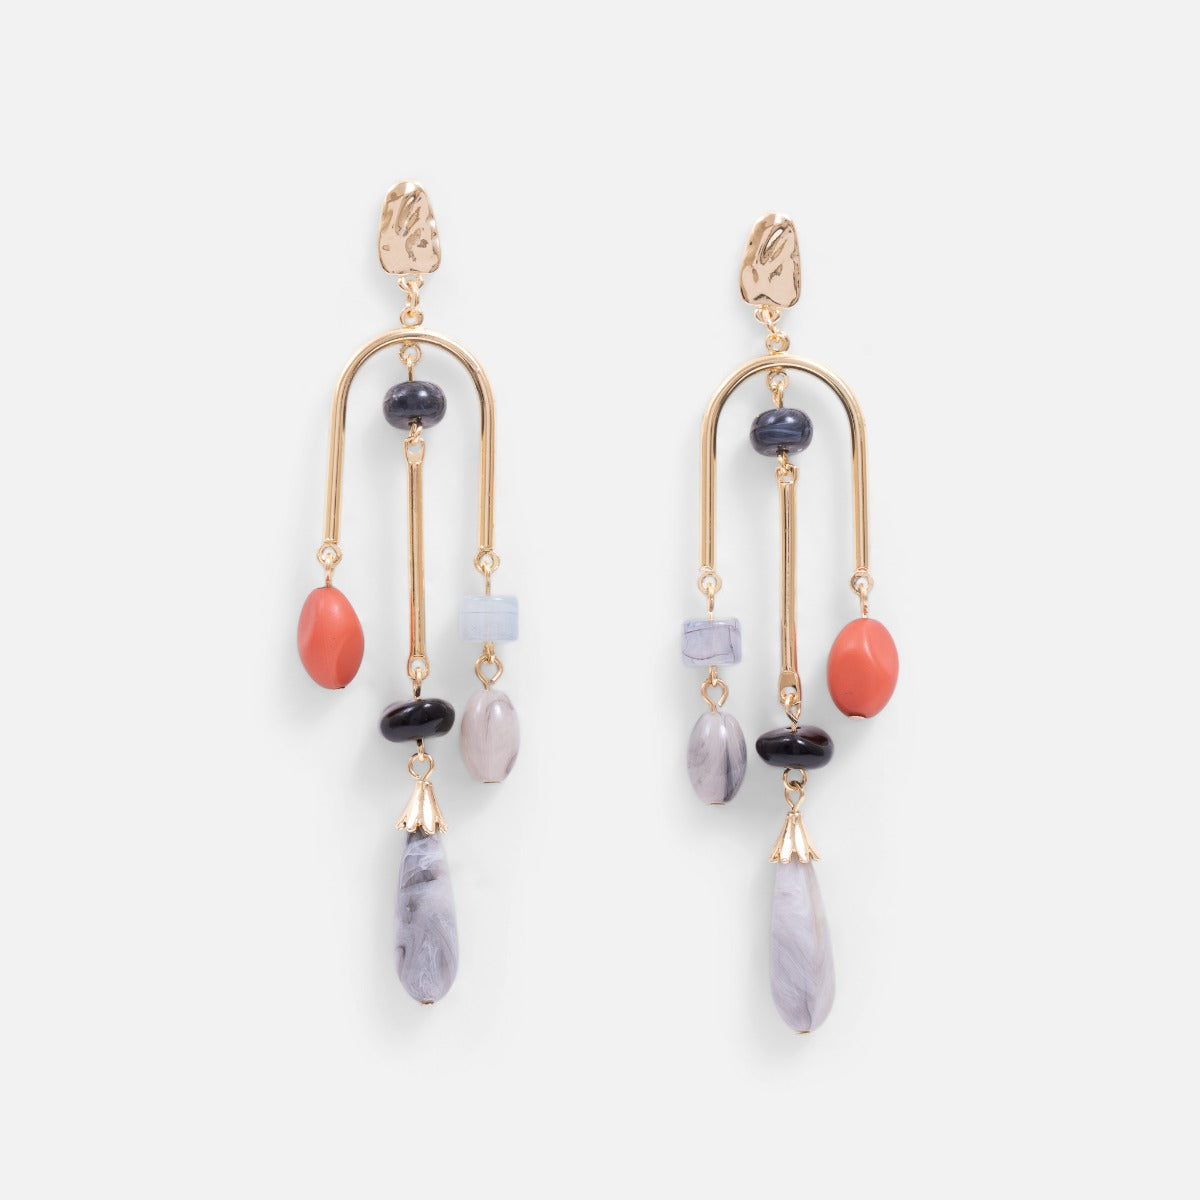 Long golden earrings with small natural stones effect